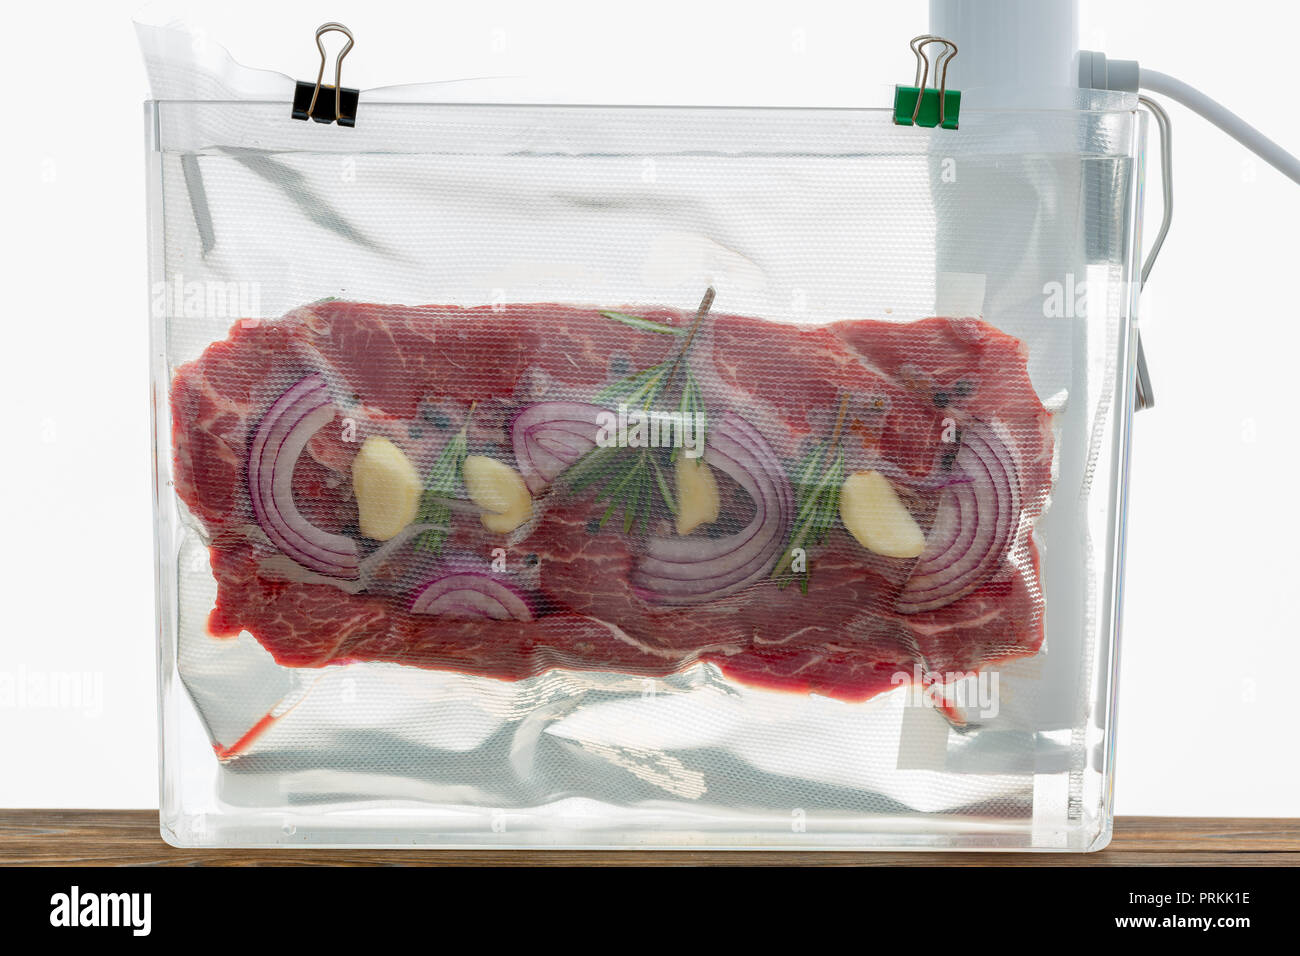 Portion of flat iron beef steak sous-vide cooking suspended in a clear plastic bag in hot water with a spirg of fresh rosemary and onions to flavor Stock Photo